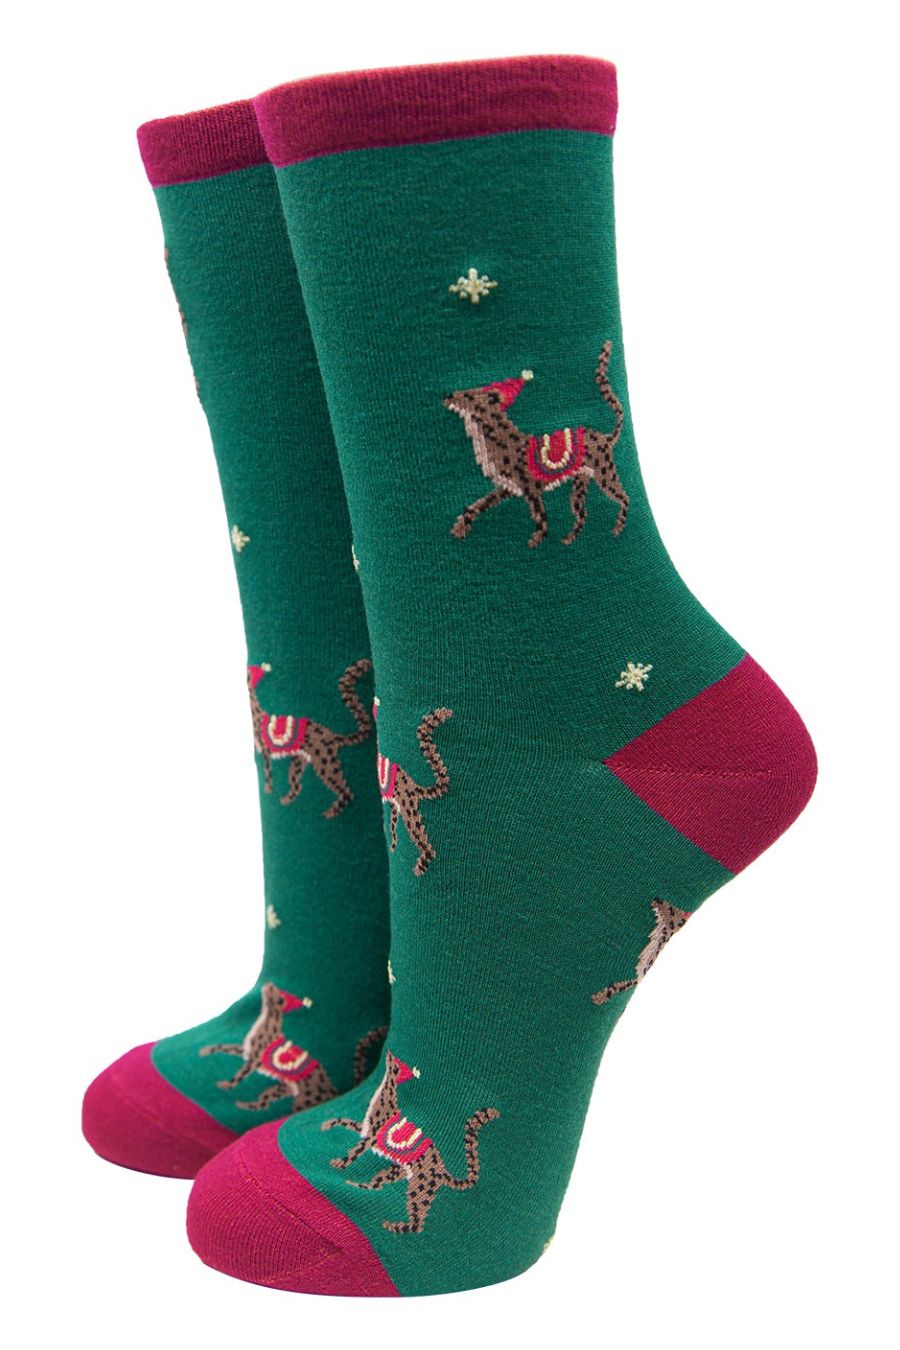 green and pink ankle socks featuring cheetahs wearing party hats